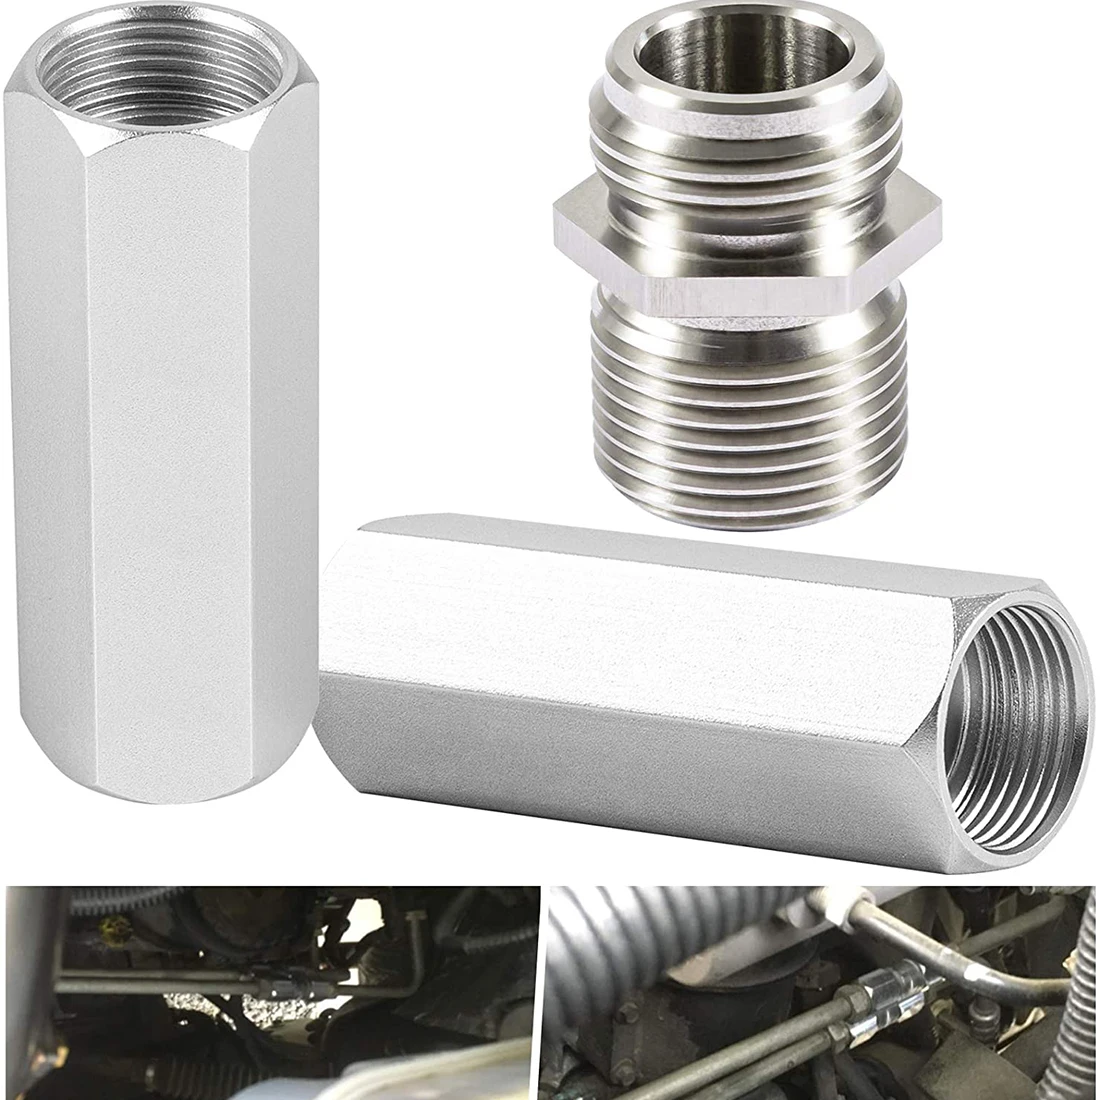 

68RFE Transmission Cooler Thermostatic Bypass & Spin On Filter Screw Fits for Cummins Diesel 6.7L Compatible with Dodge RAM